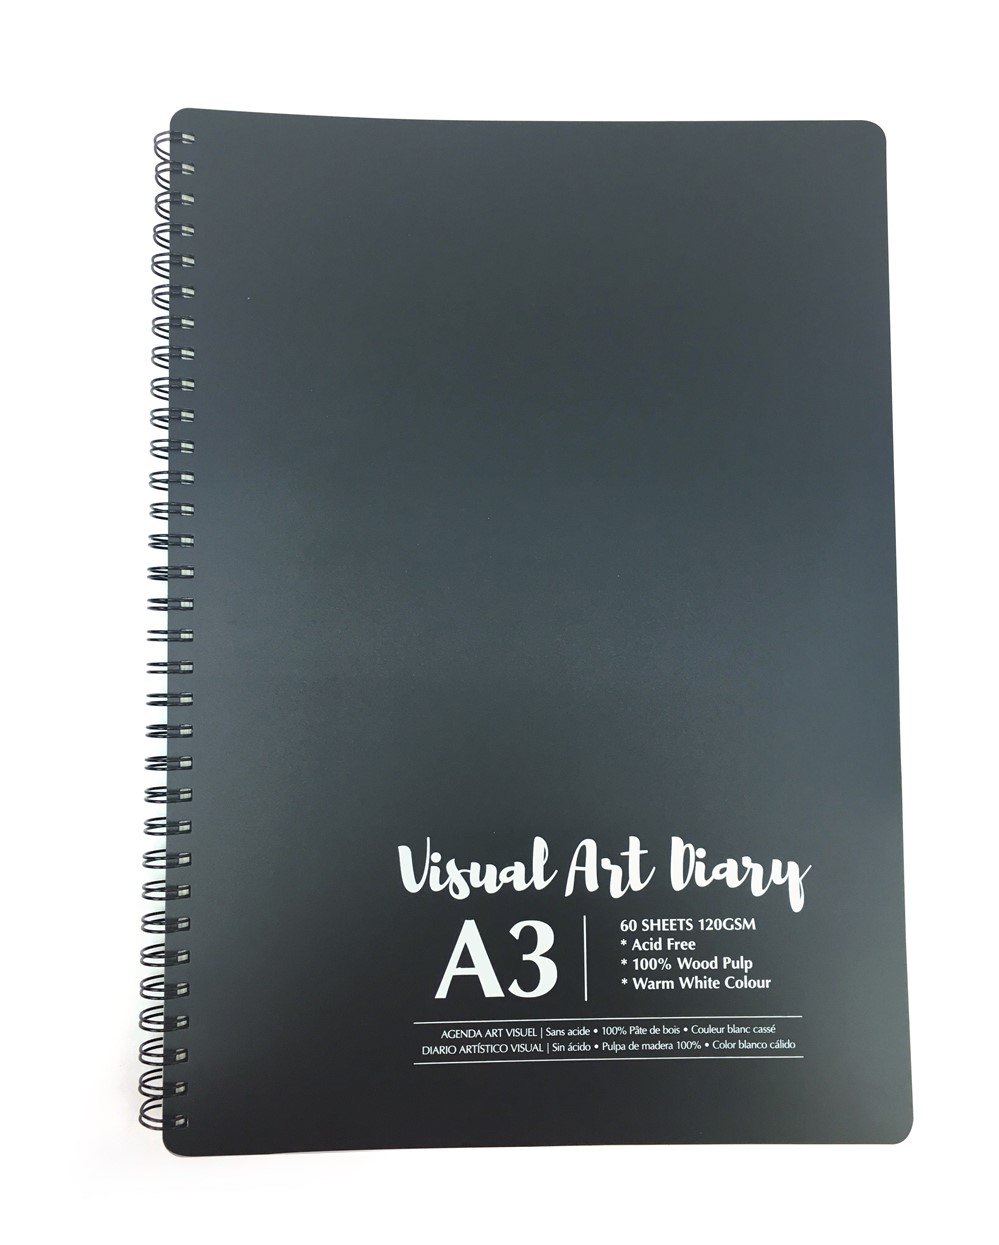 Visuel art diary A3 60 pages - UBL